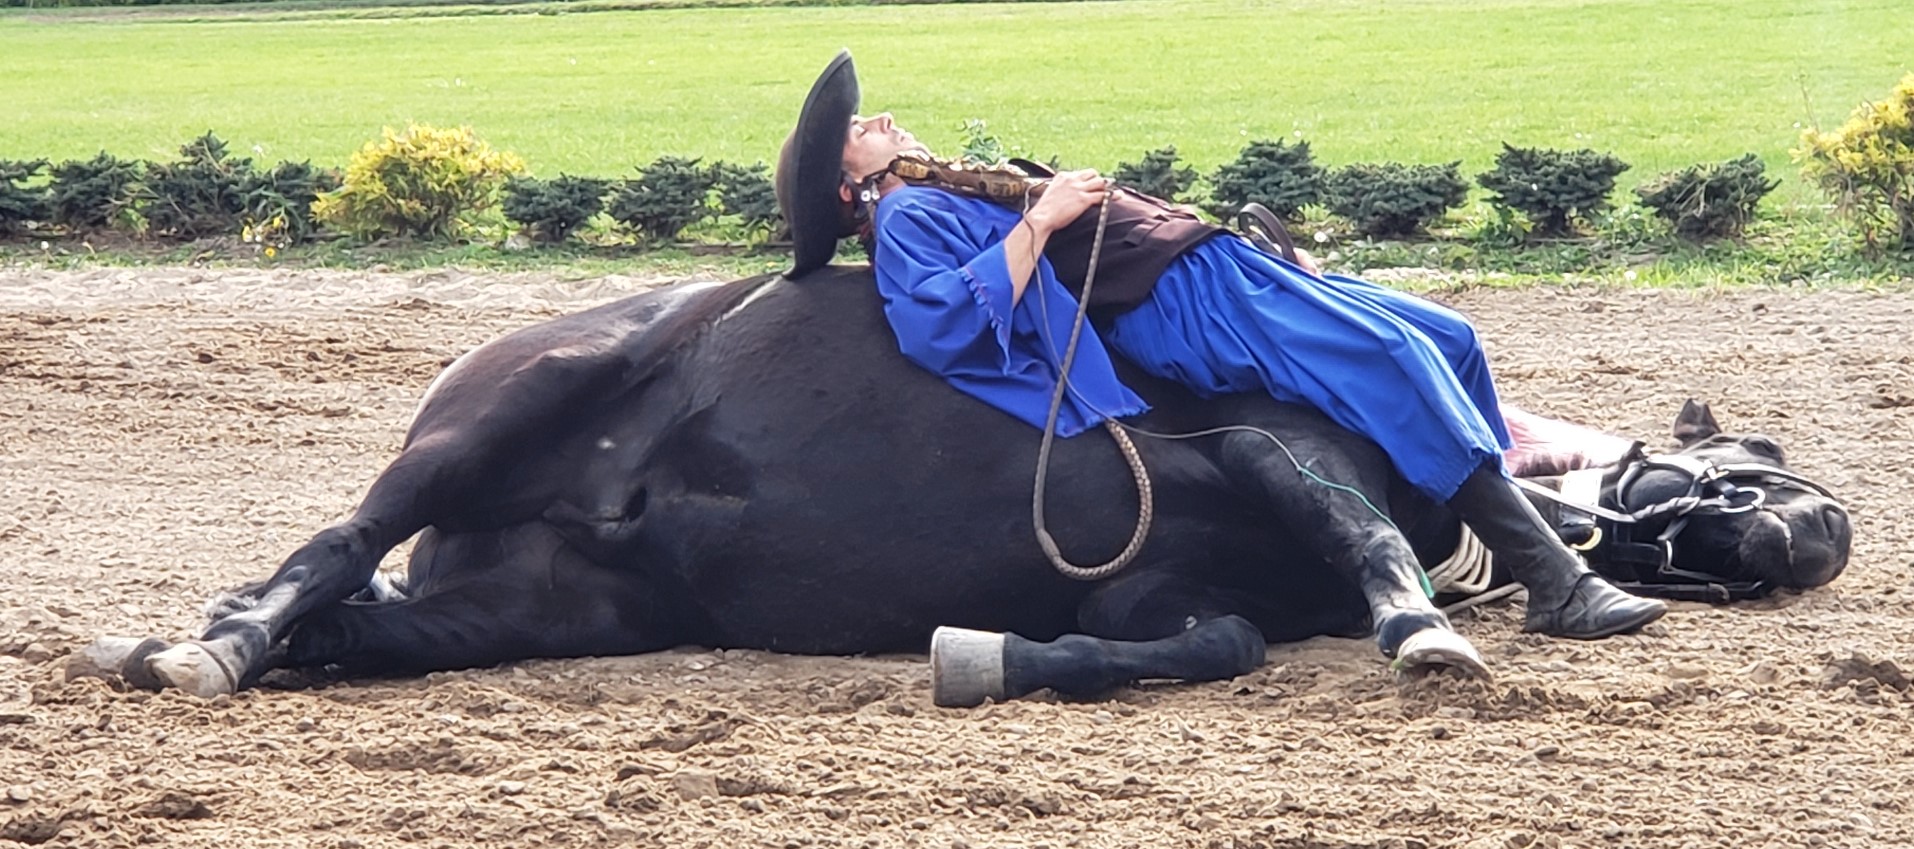 Rider Lying on Top of Horse